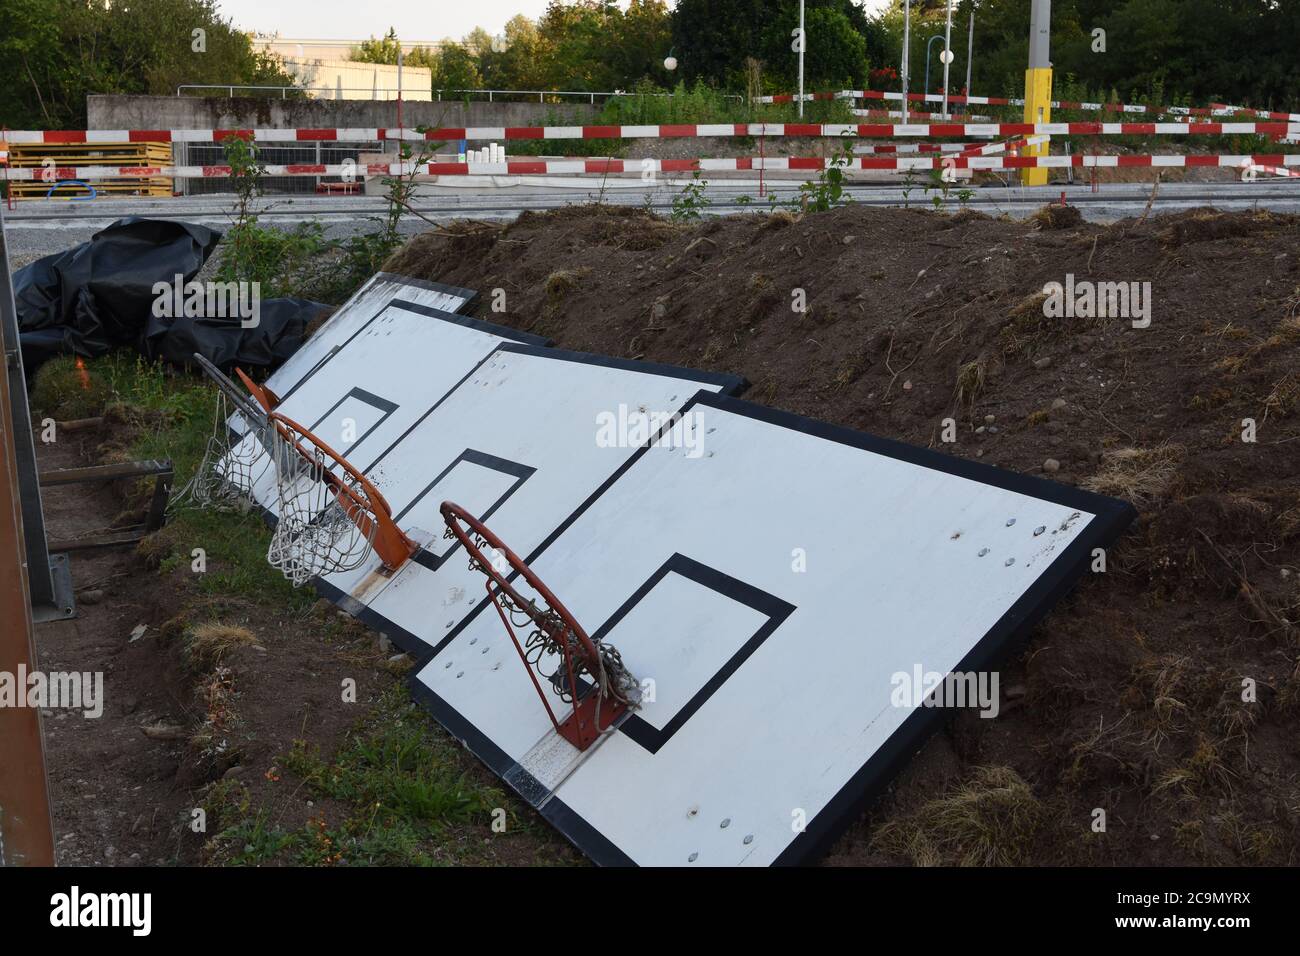 Basketball boards uninstalled from the stands and put on the ground due to reconstruction of sport field during coronavirus. Stock Photo